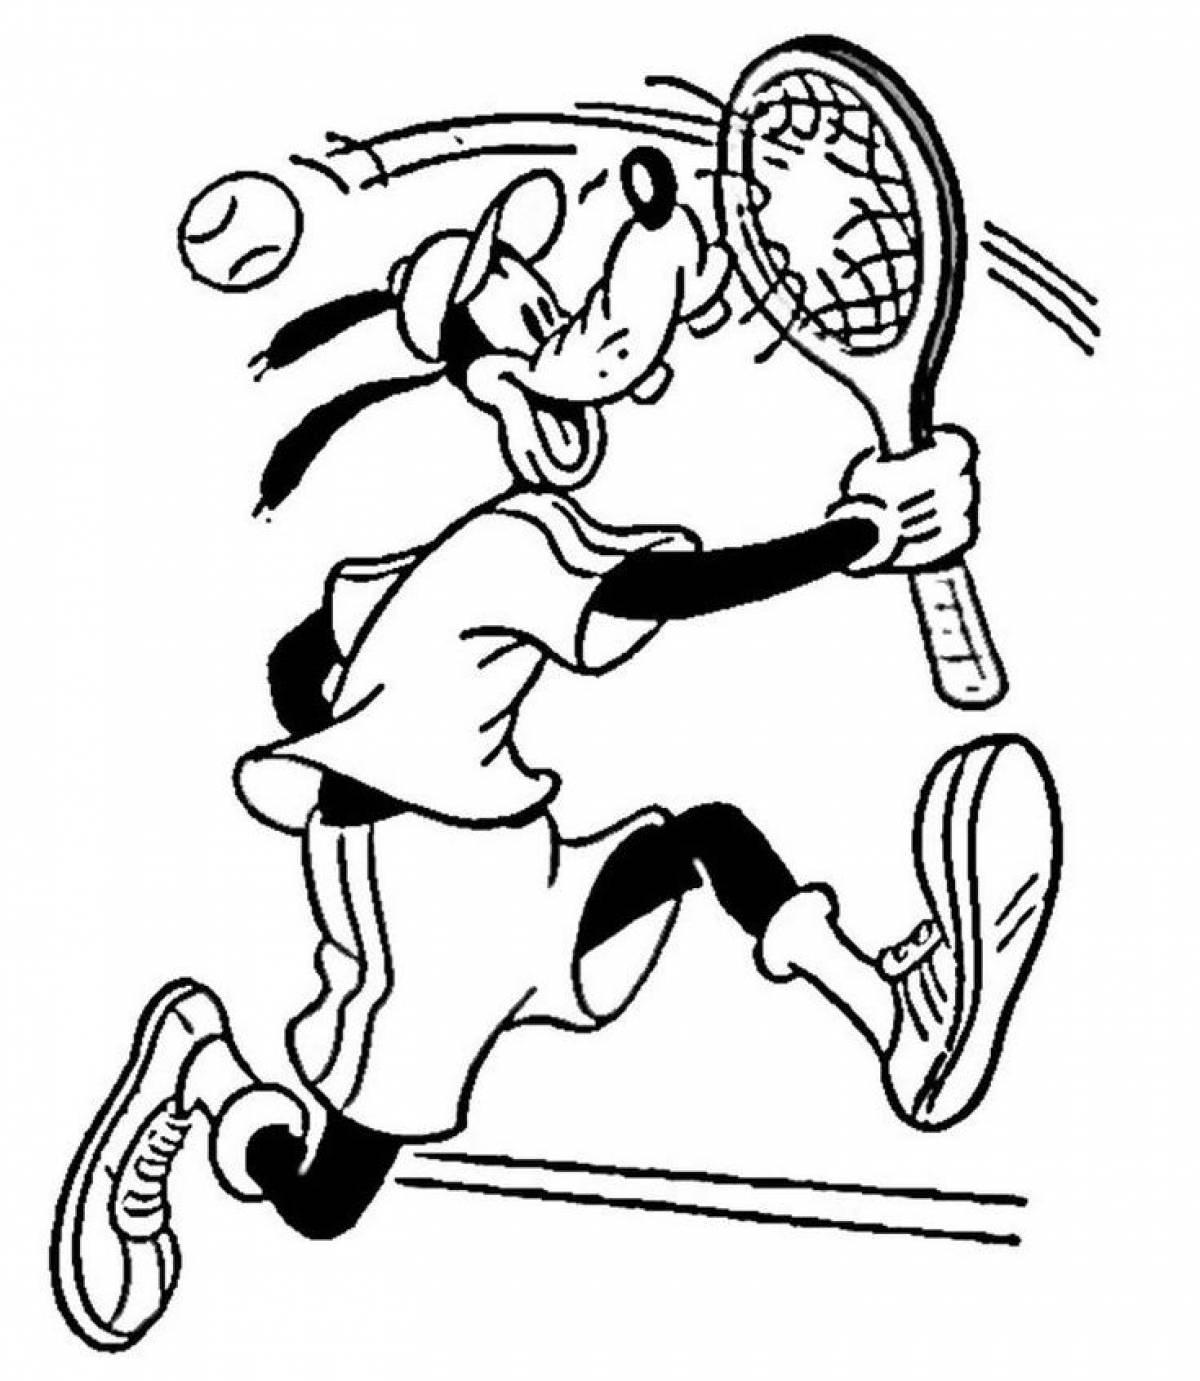 Goofy and tennis